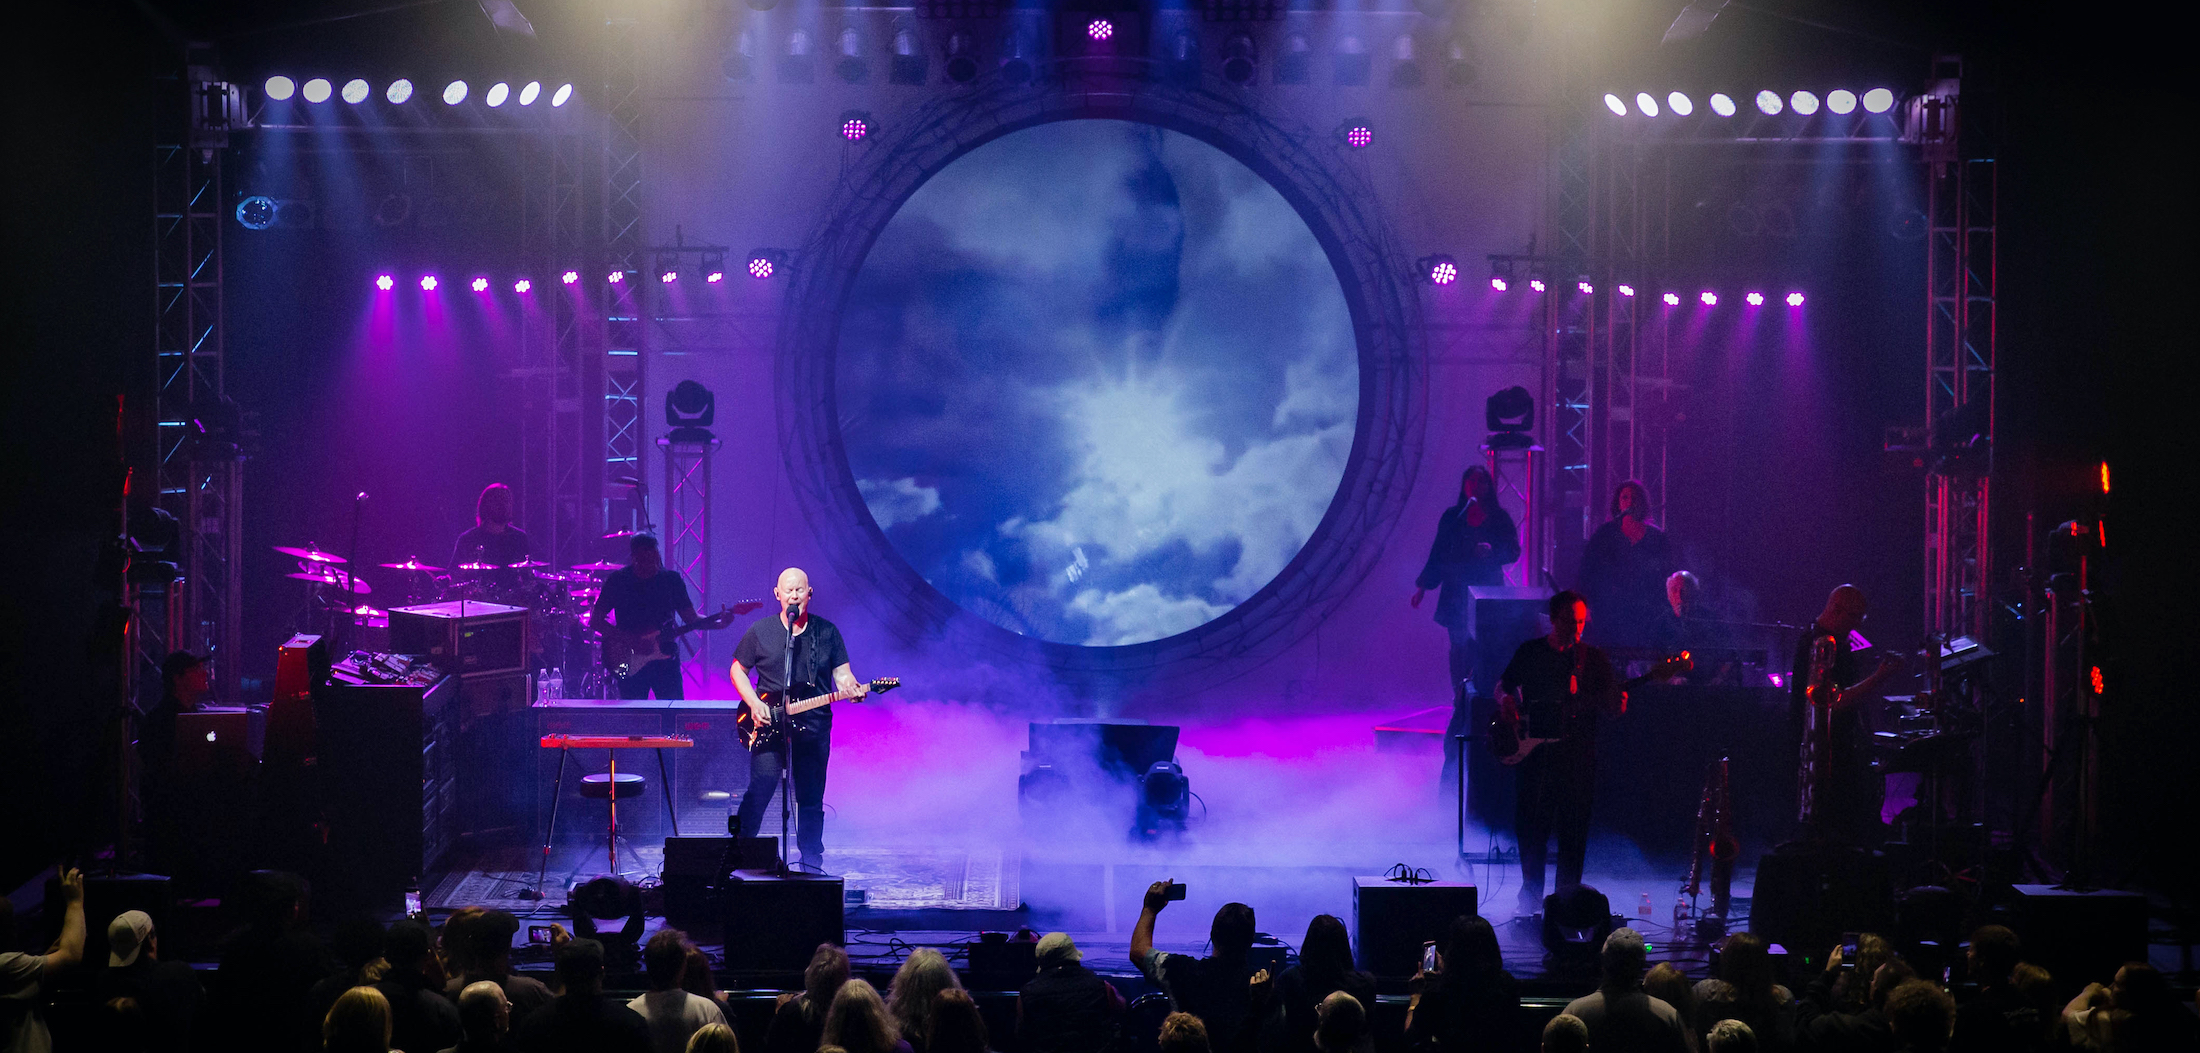 Tears For Fears - Woman in Chains (Moody Center, Austin, TX 07/17